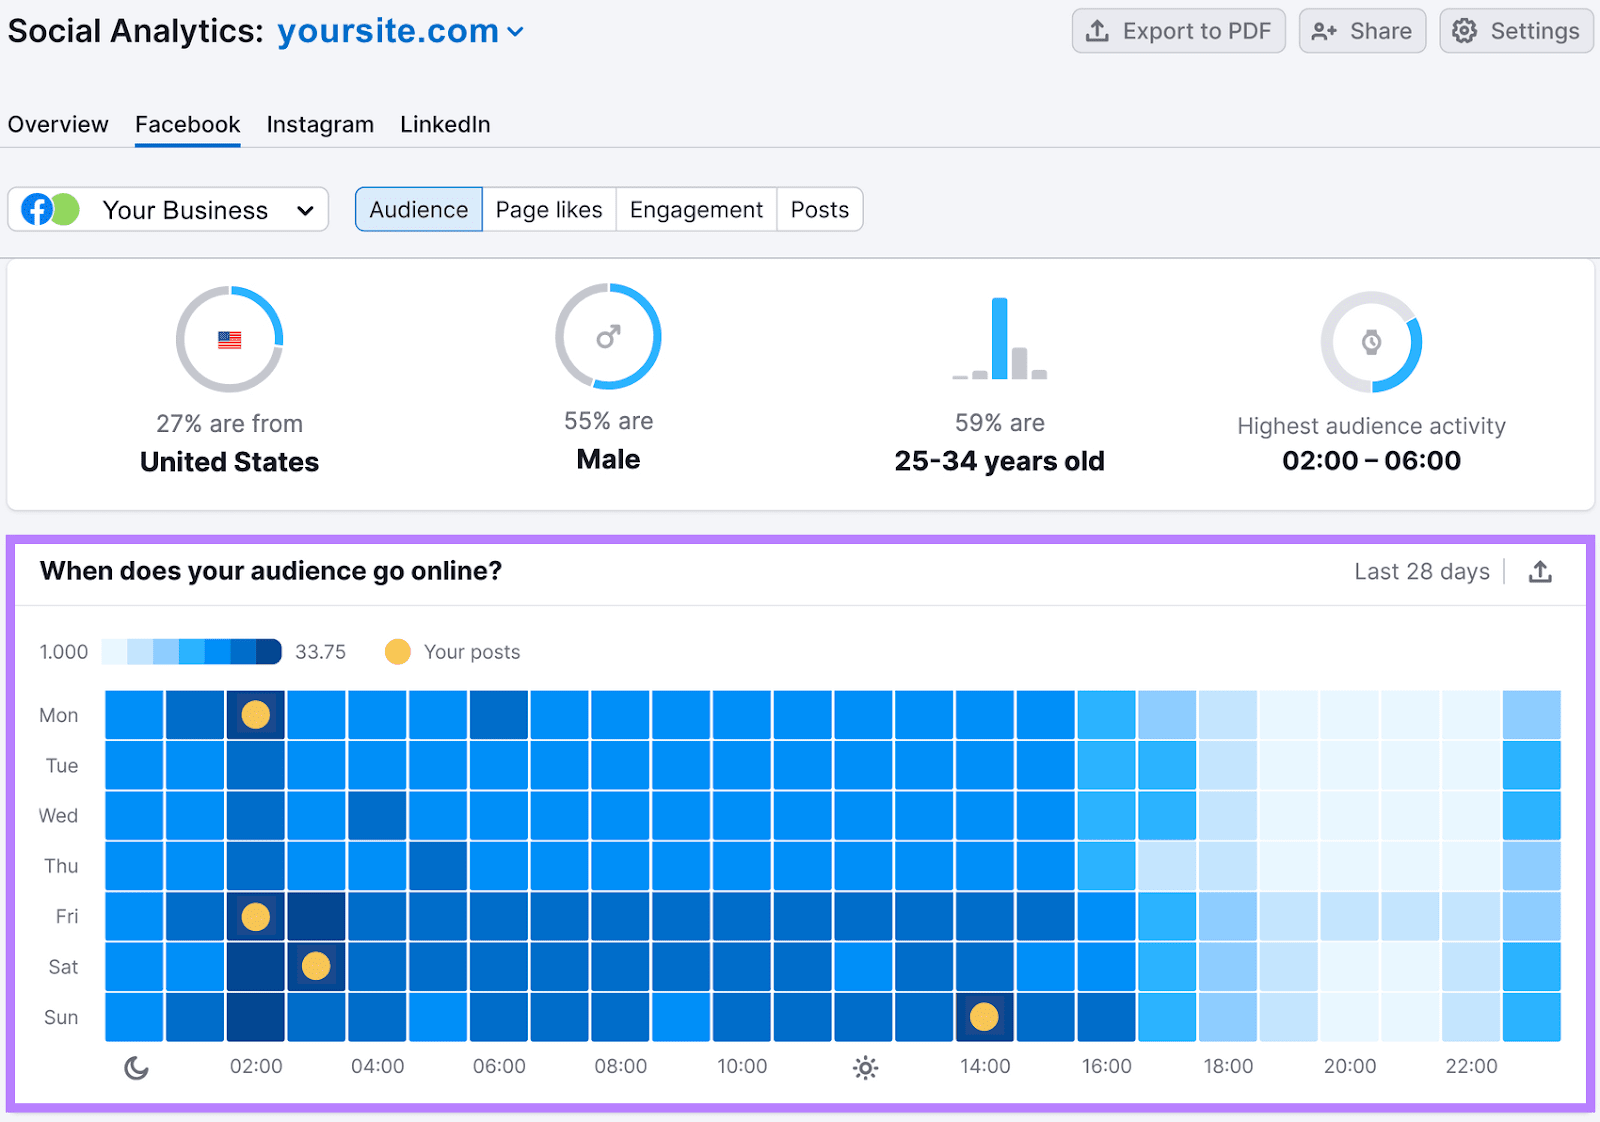 Social Analytics dashboard with focus on the heat map "When does your audience go online?" reflecting user engagement times.